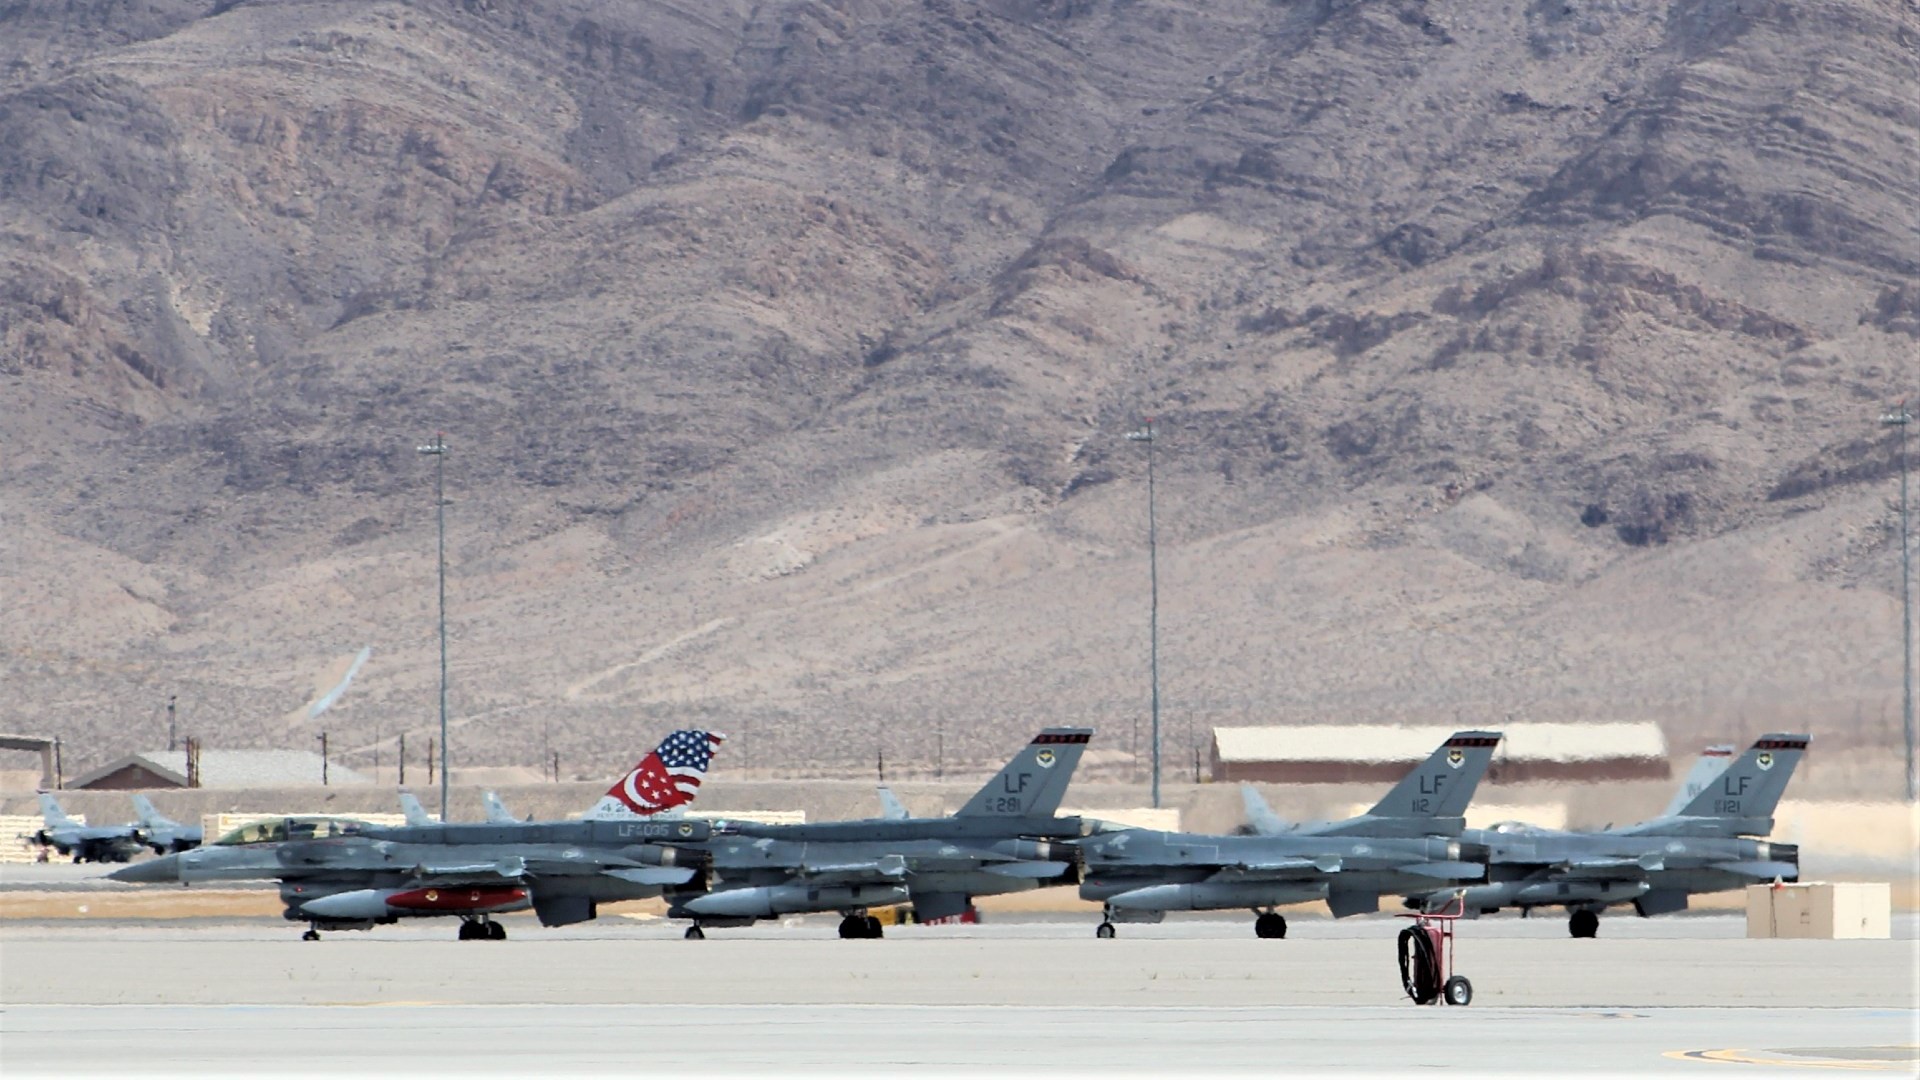 The Republic of Singapore Air Force (RSAF)'s F-16C/D fighter aircraft from Peace Carvin II (PC II) detachment arrives at Nellis Air Force Base, Nevada, United States to participate in Exercise Red Flag – Nellis 2022 (XRFN 22).